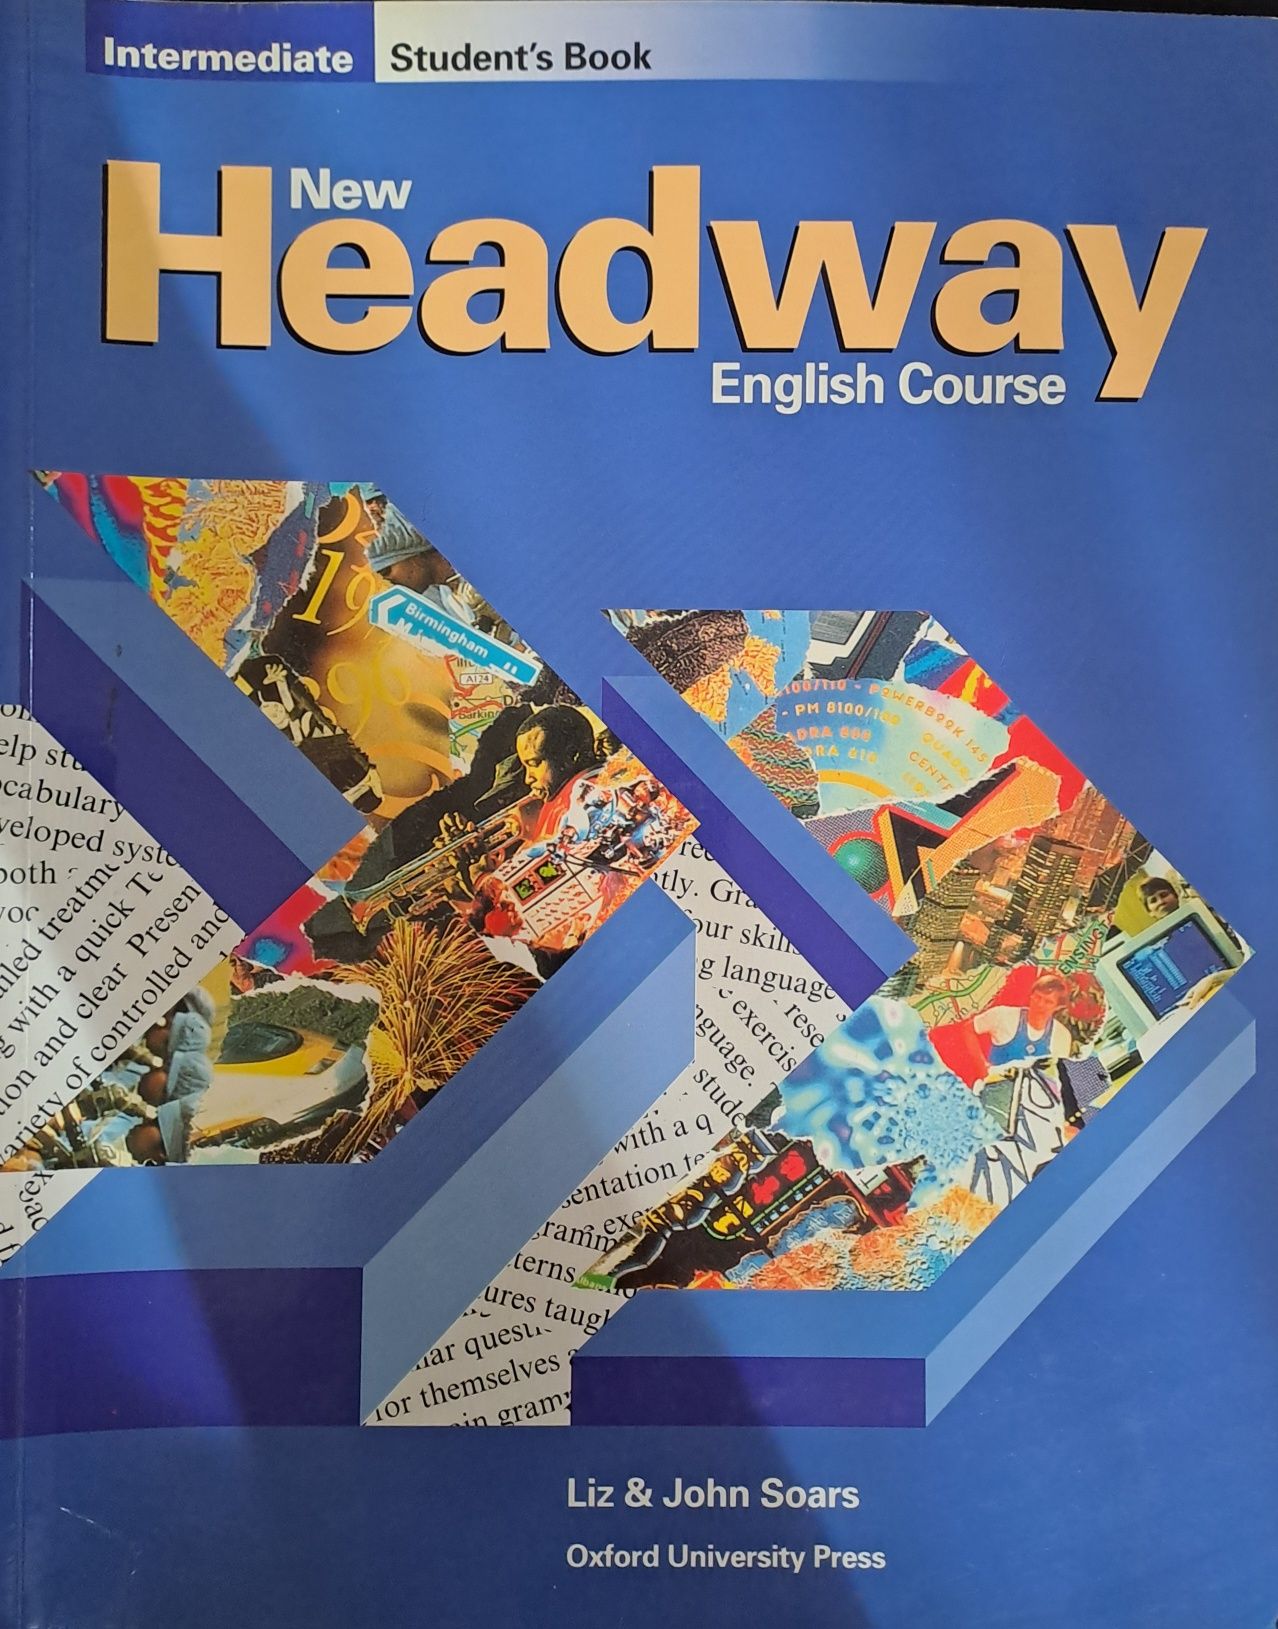 New Headway English Cours Intermediate Student's Book